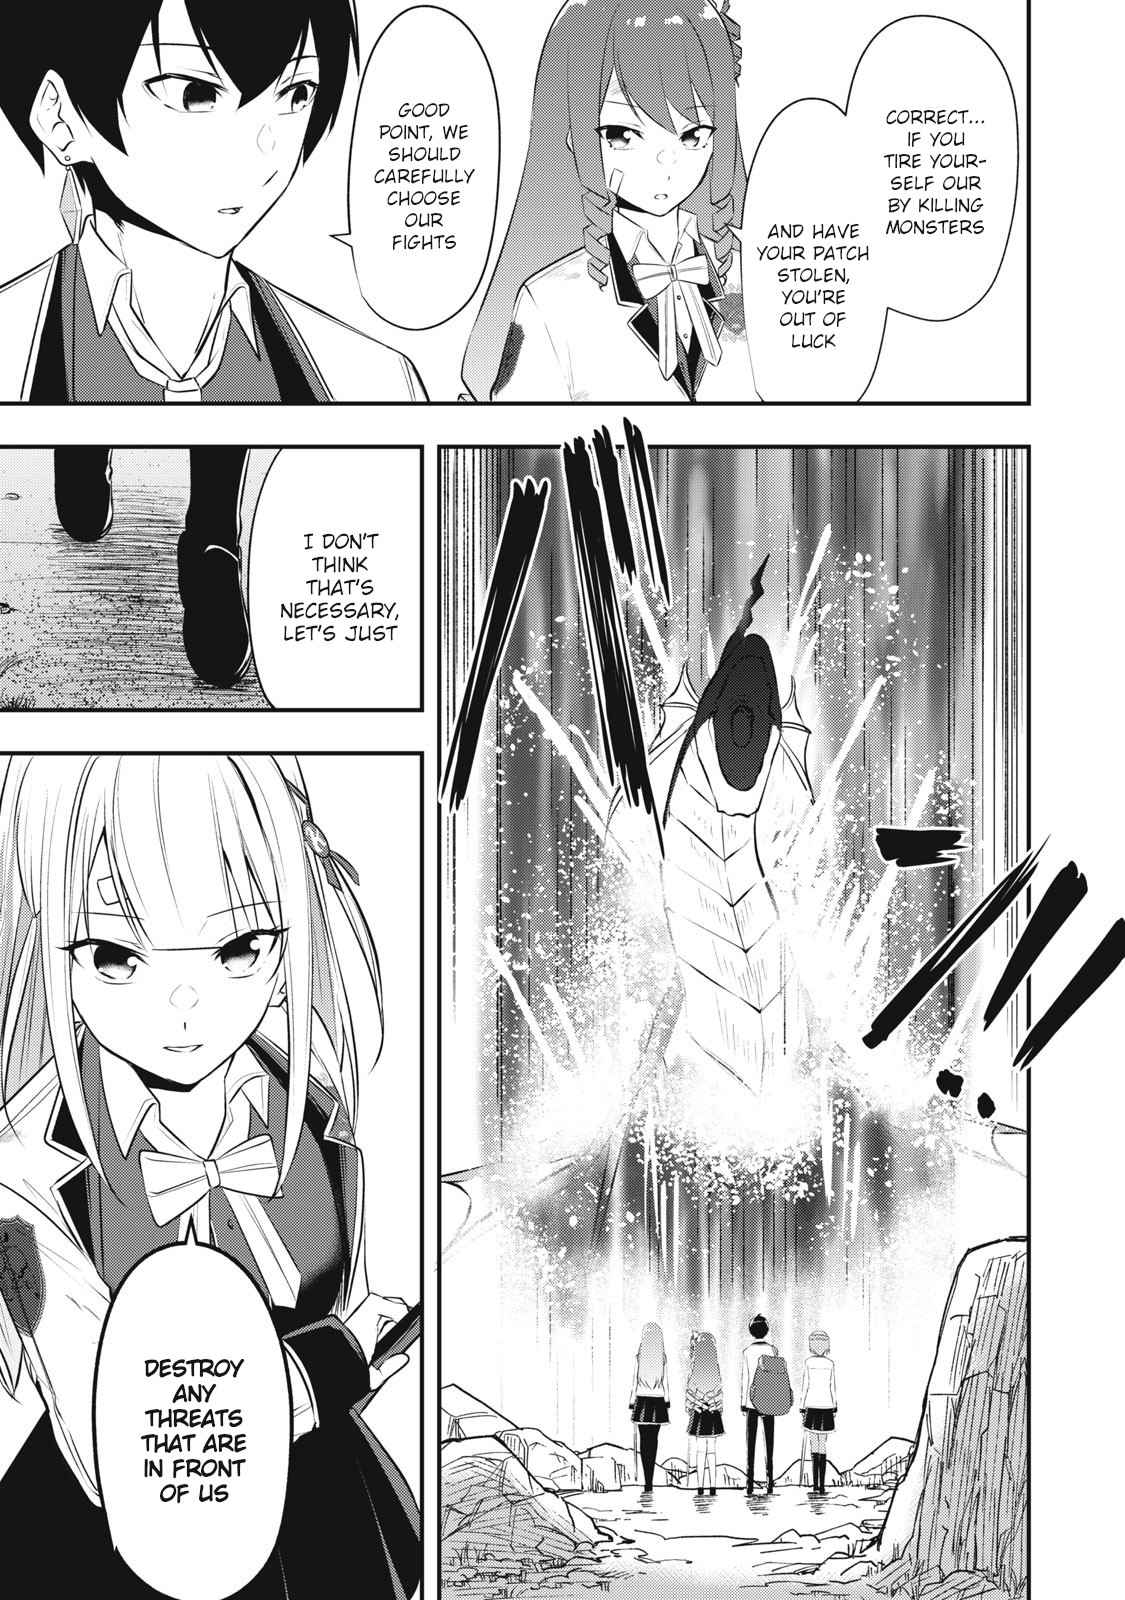 The Last Sage of the Imperial Sword Academy Chapter 18-eng-li - Page 16